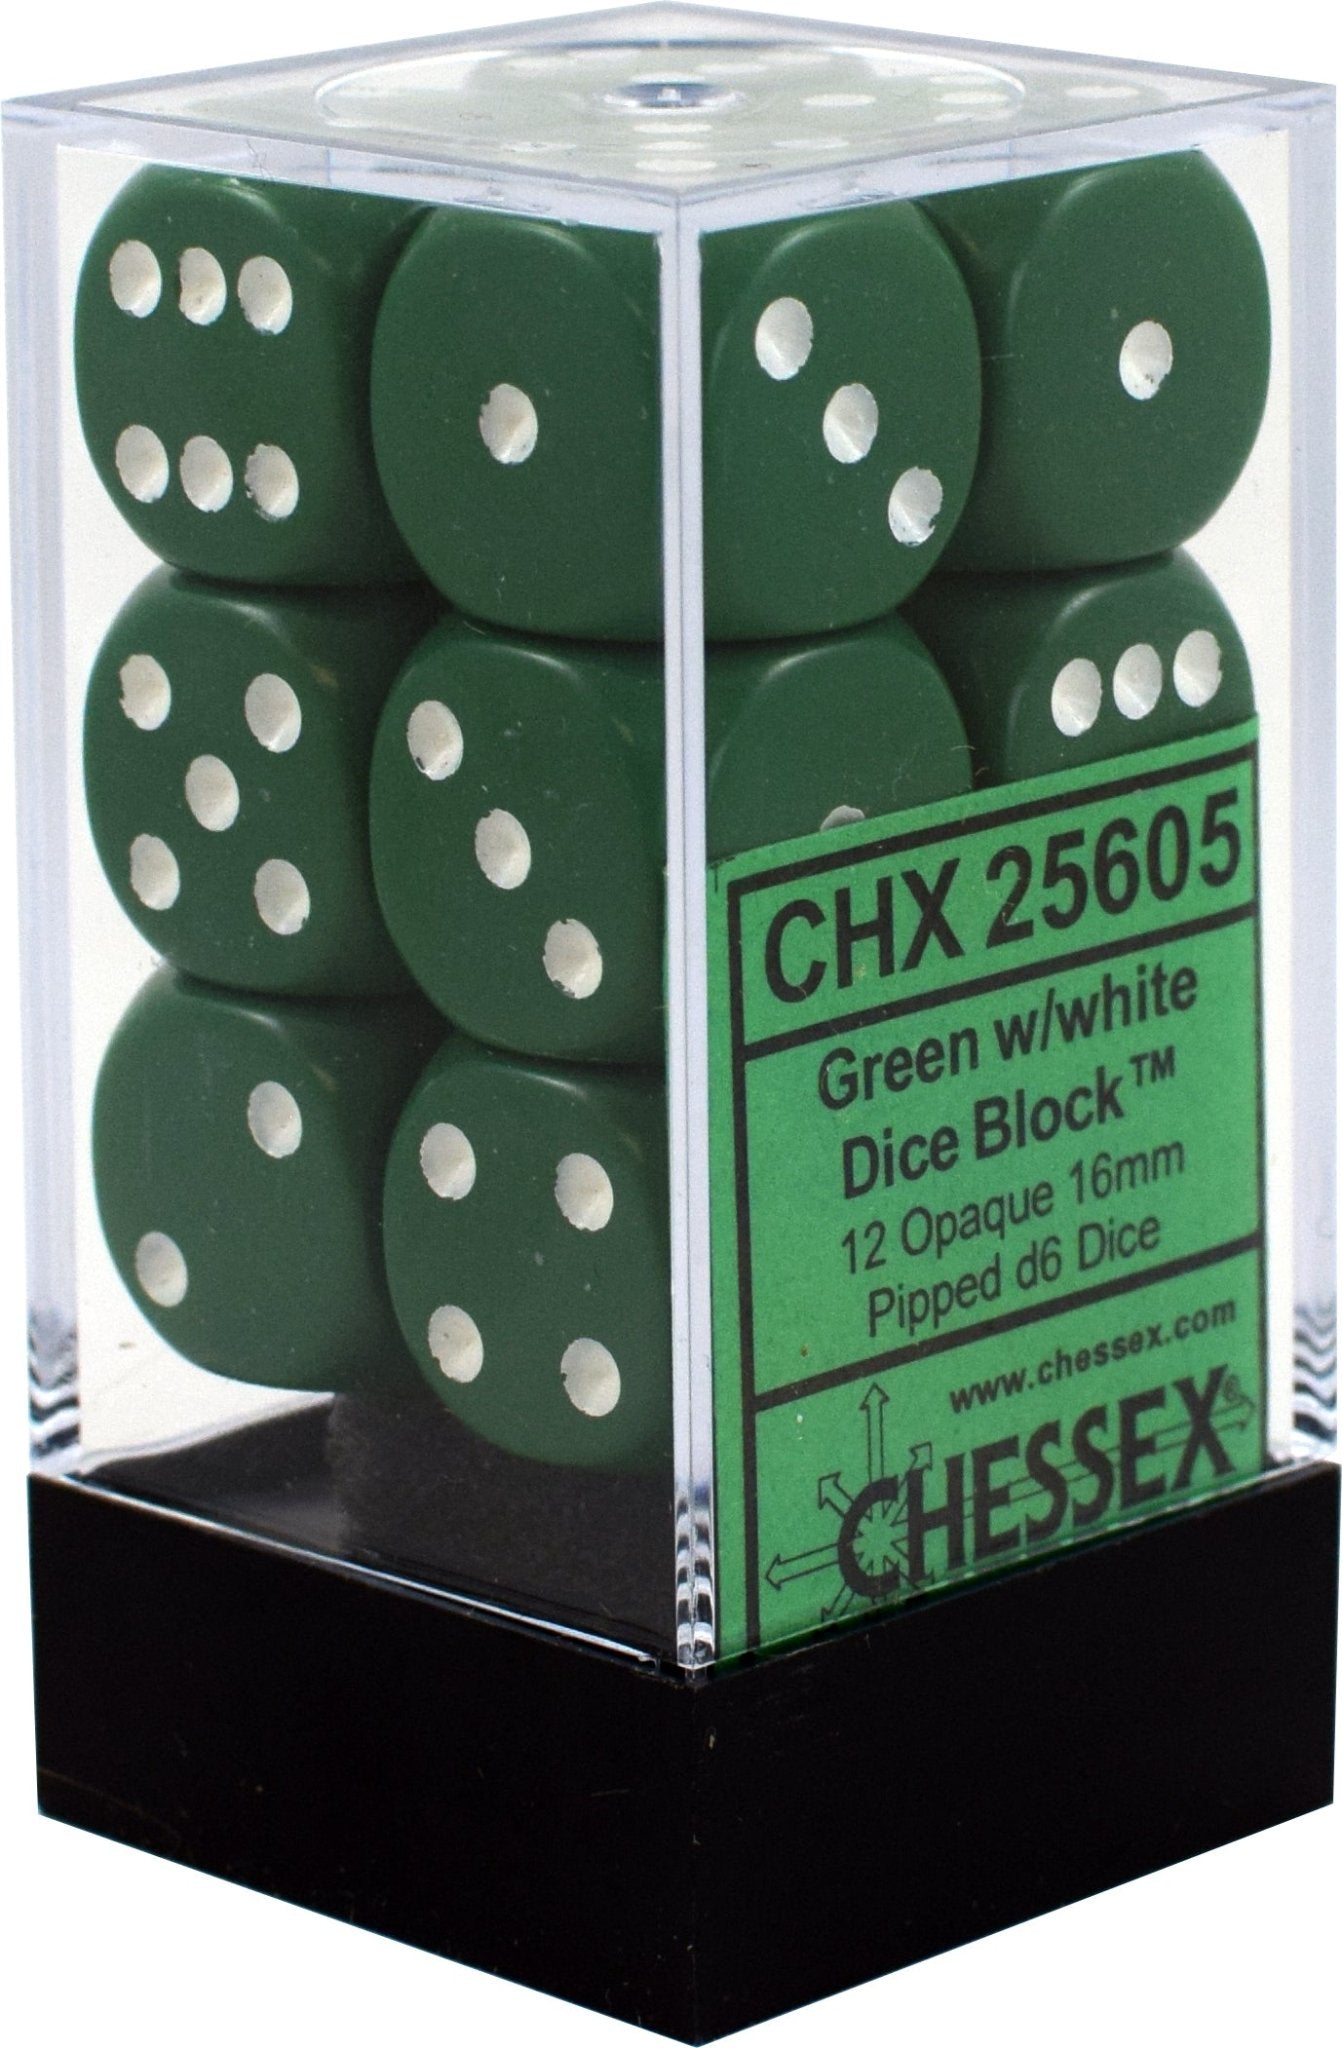 Chessex Dice: D6 Block 16mm - Opaque - Green with White (CHX 25605) - Gamescape